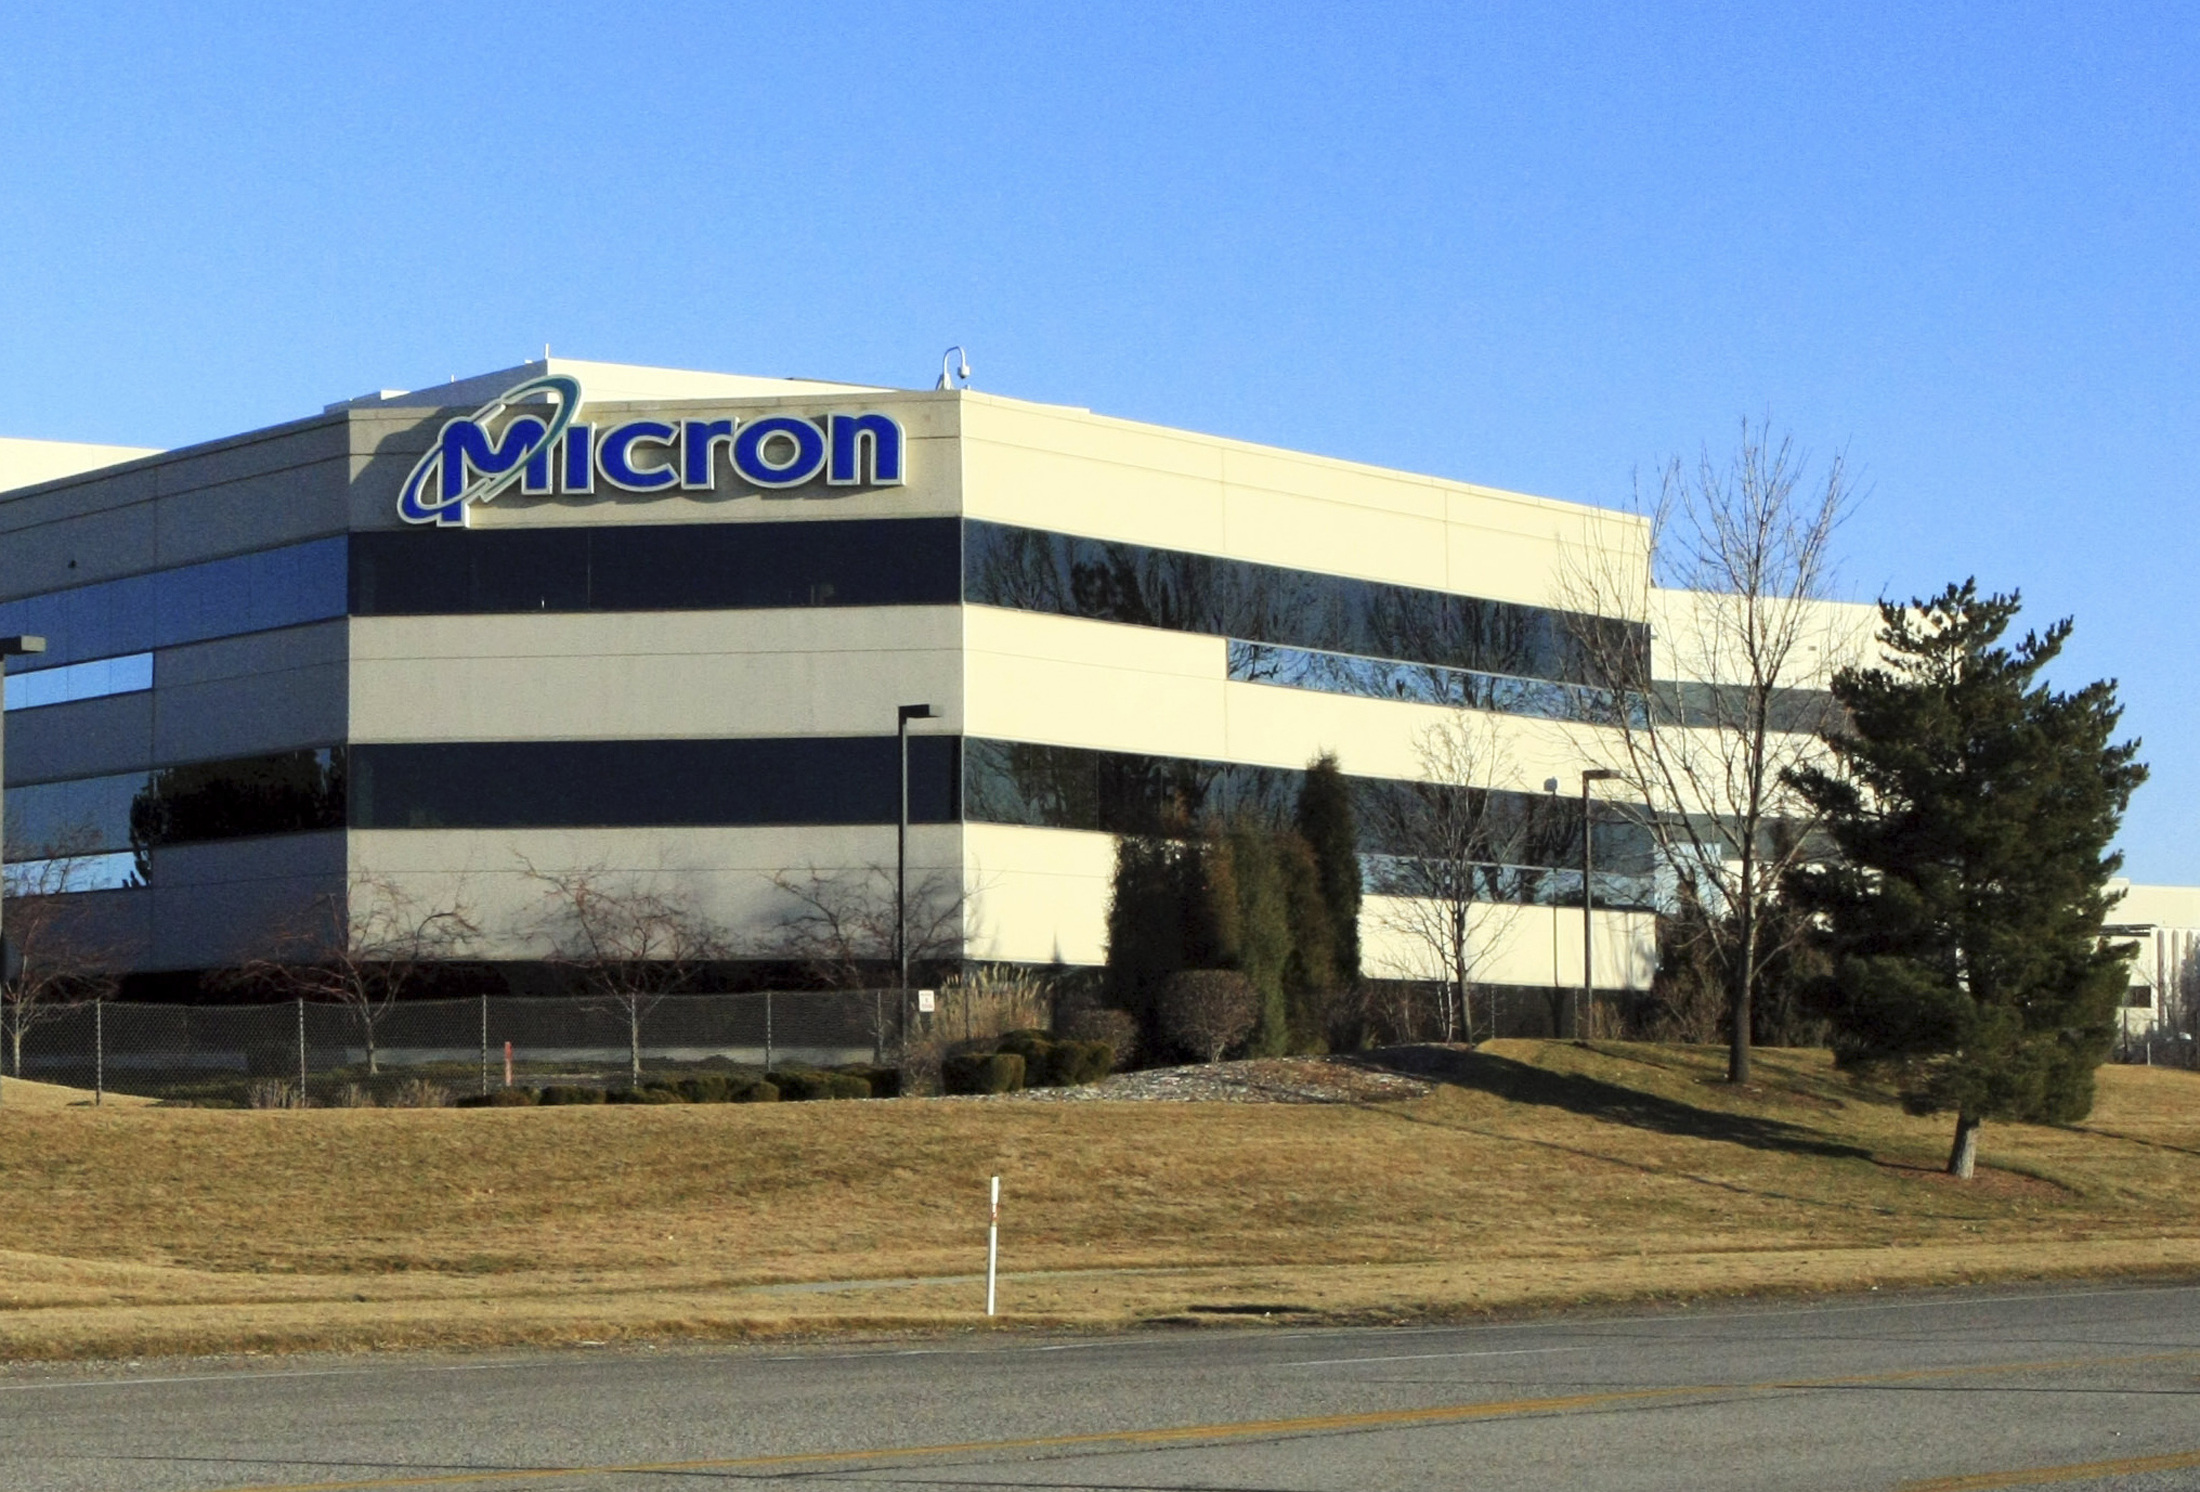 The main entrance to Micron corporate headquarters in Boise, Idaho